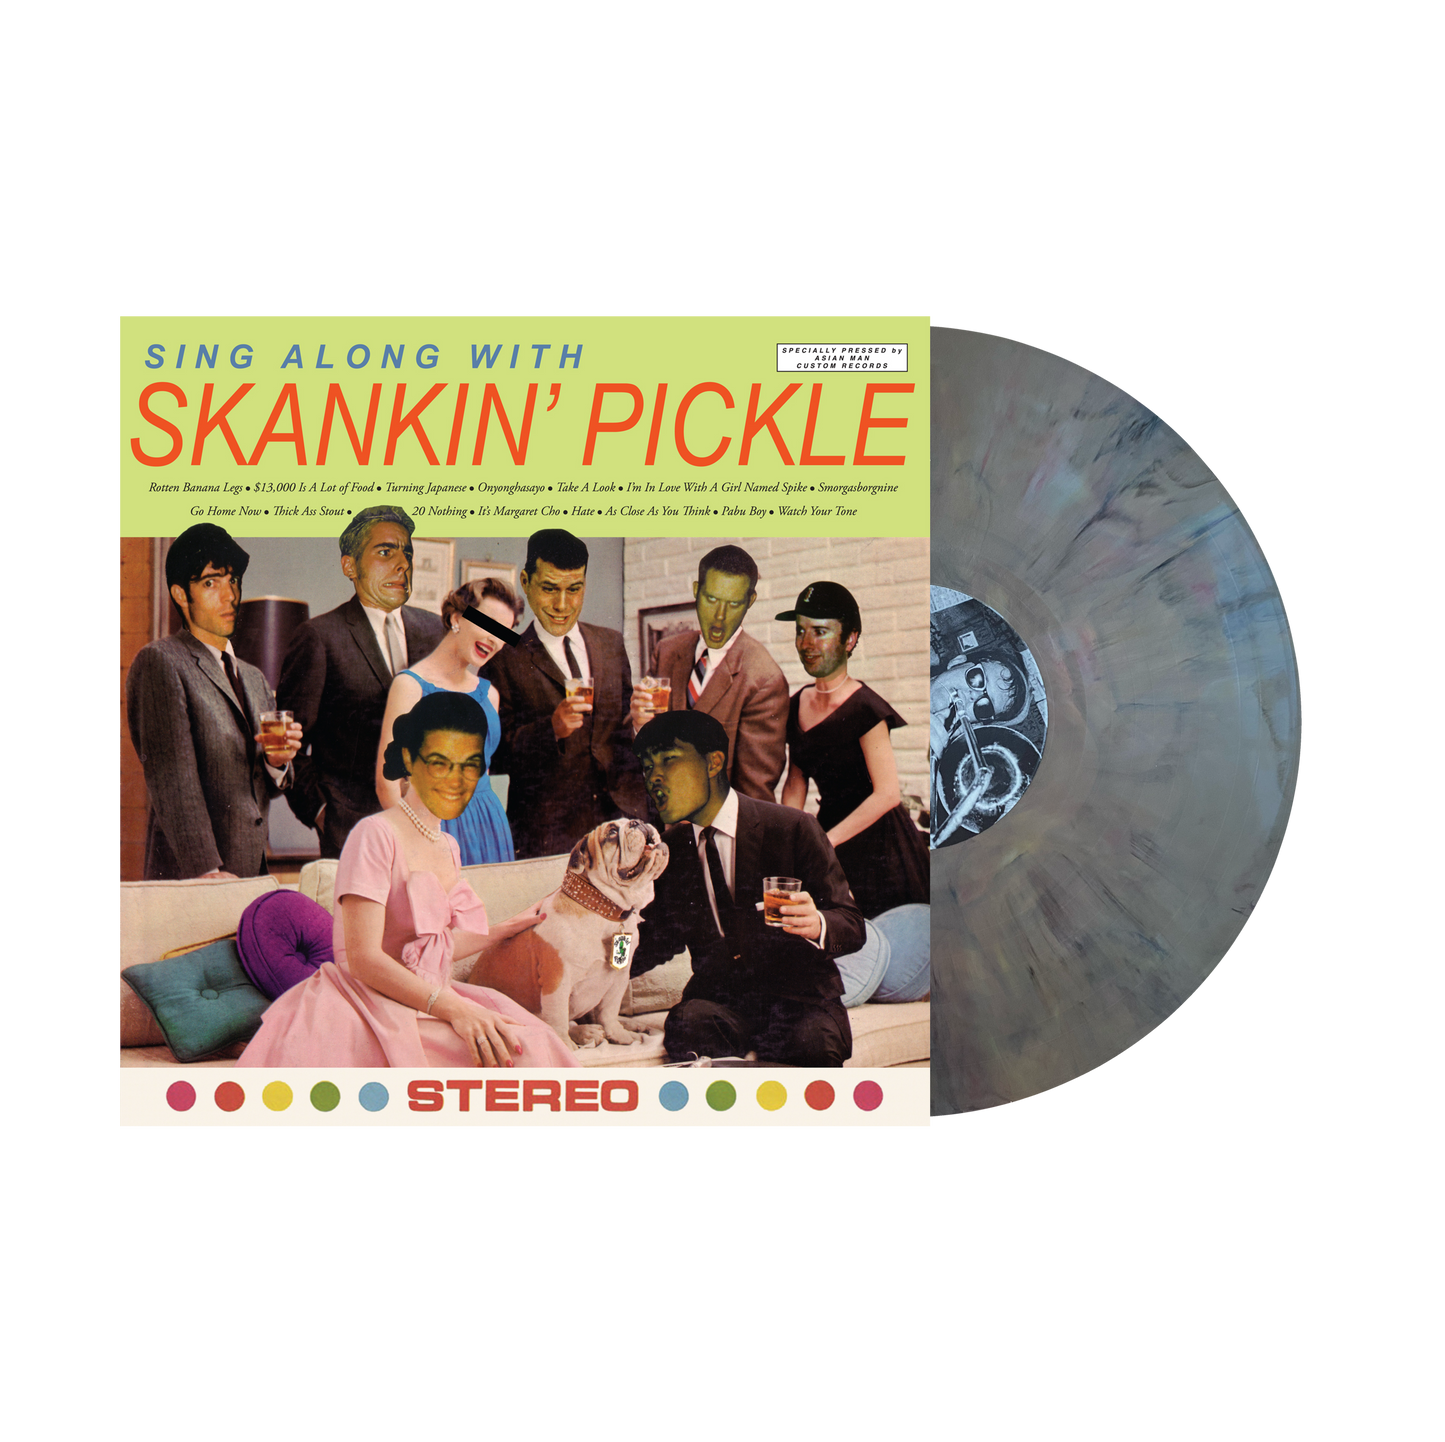 Skankin Pickle "Sing Along With..." LP